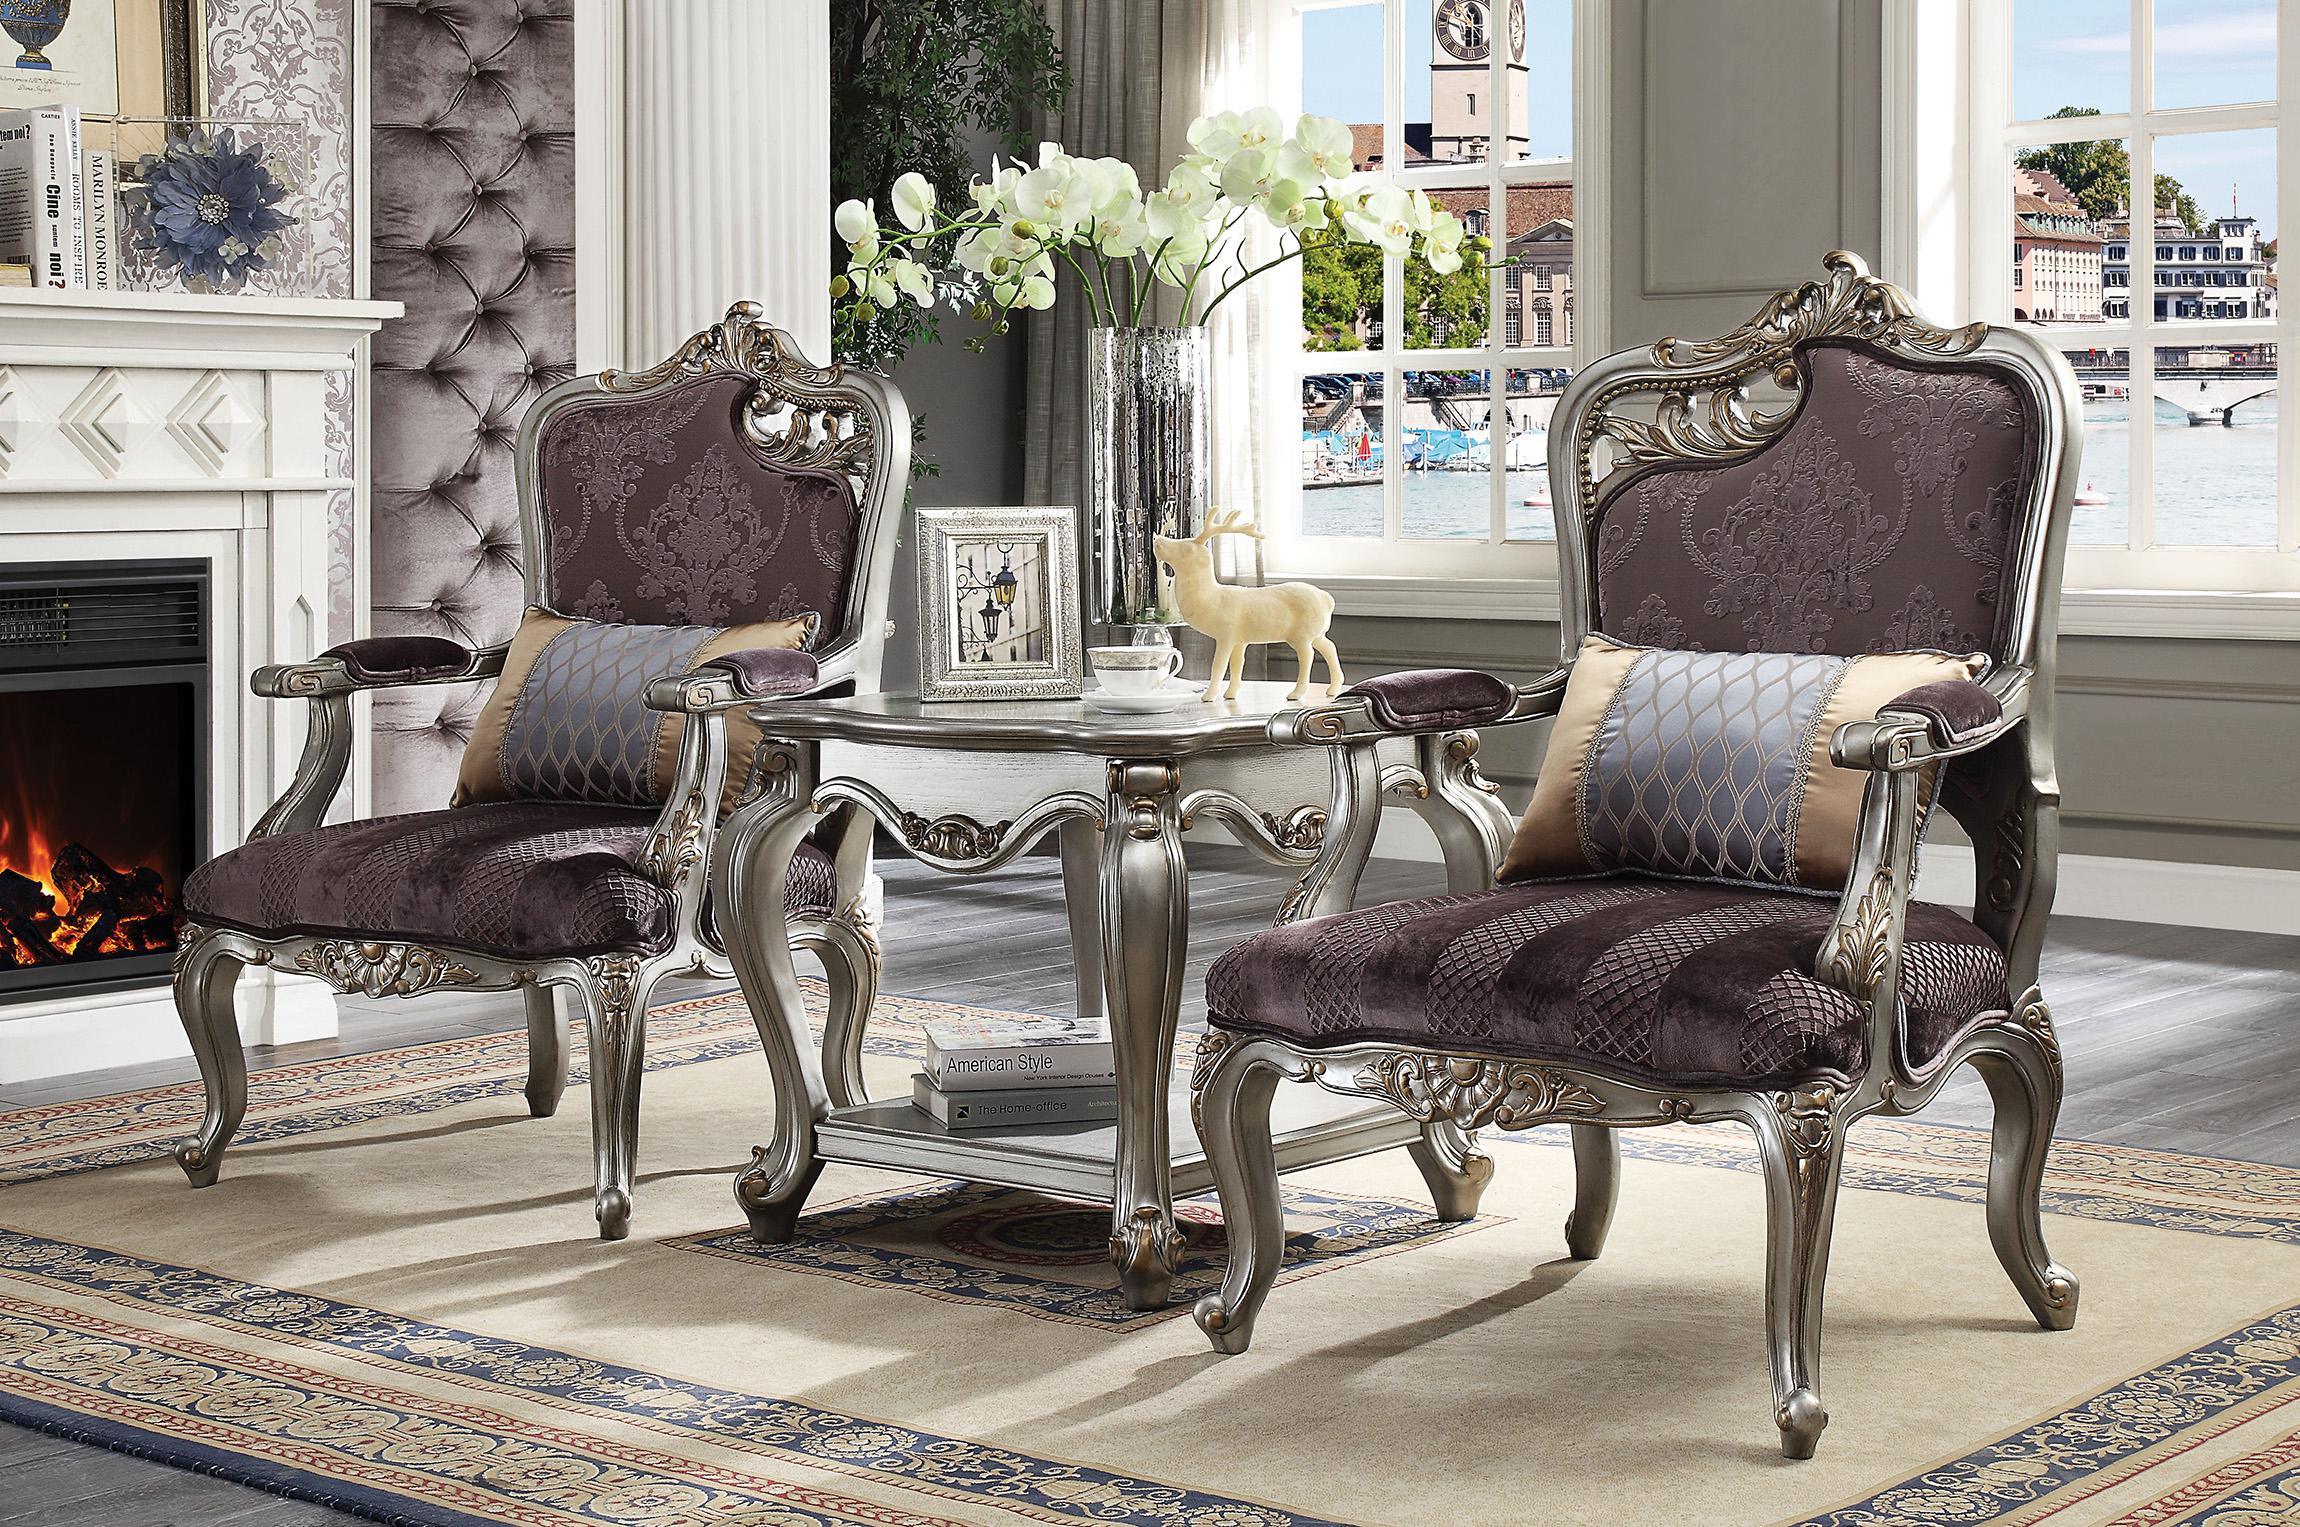 Classic, Traditional Accent Chair Set Picardy II 53466 53466-Set-2-Picardy II in Platinum, Antique, Violet Velvet